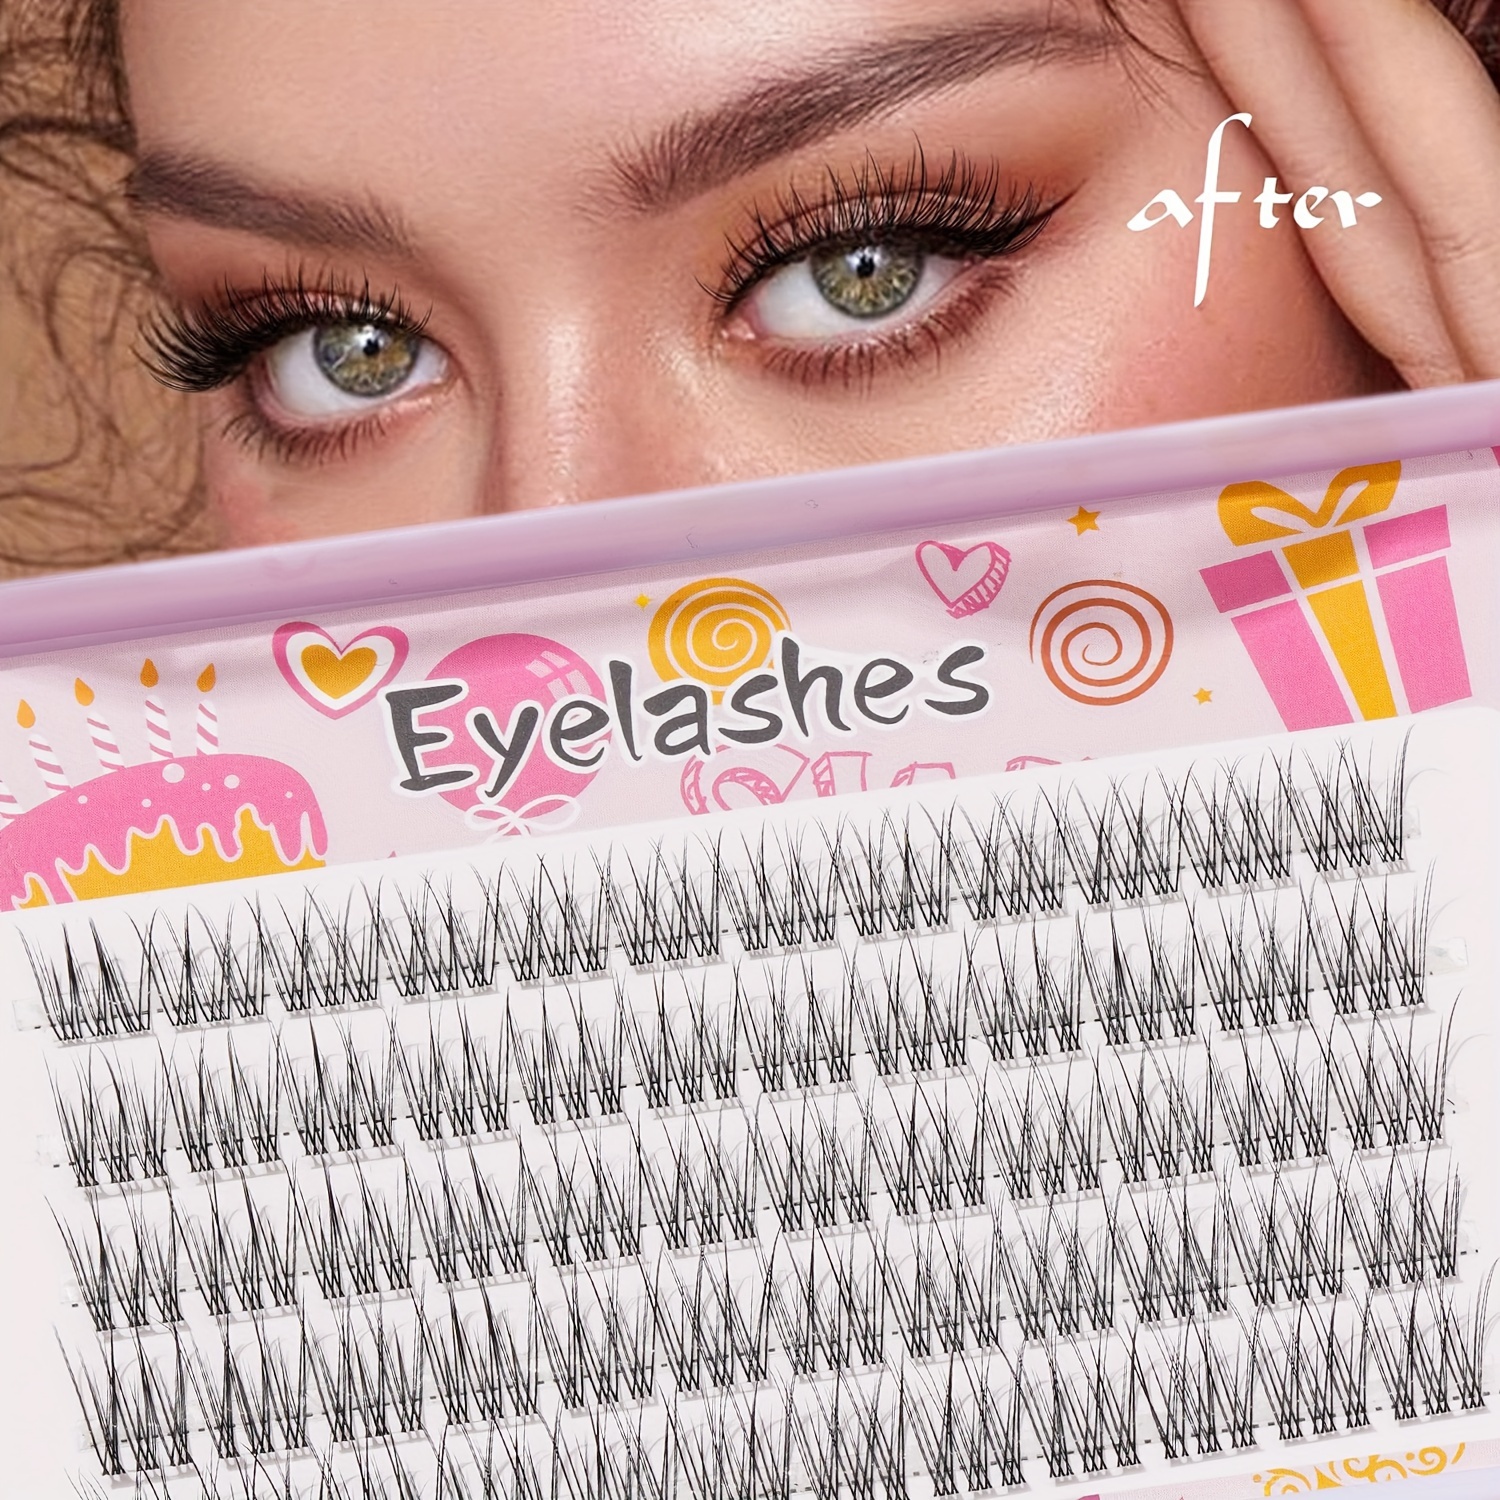 

60pcs Natural Looking Individual Cluster Eyelashes, Wispy Cross Lashes Fishtail Design, Soft And Lightweight, Perfect For Daily Or Commuting Makeup, Reusable Multi Times